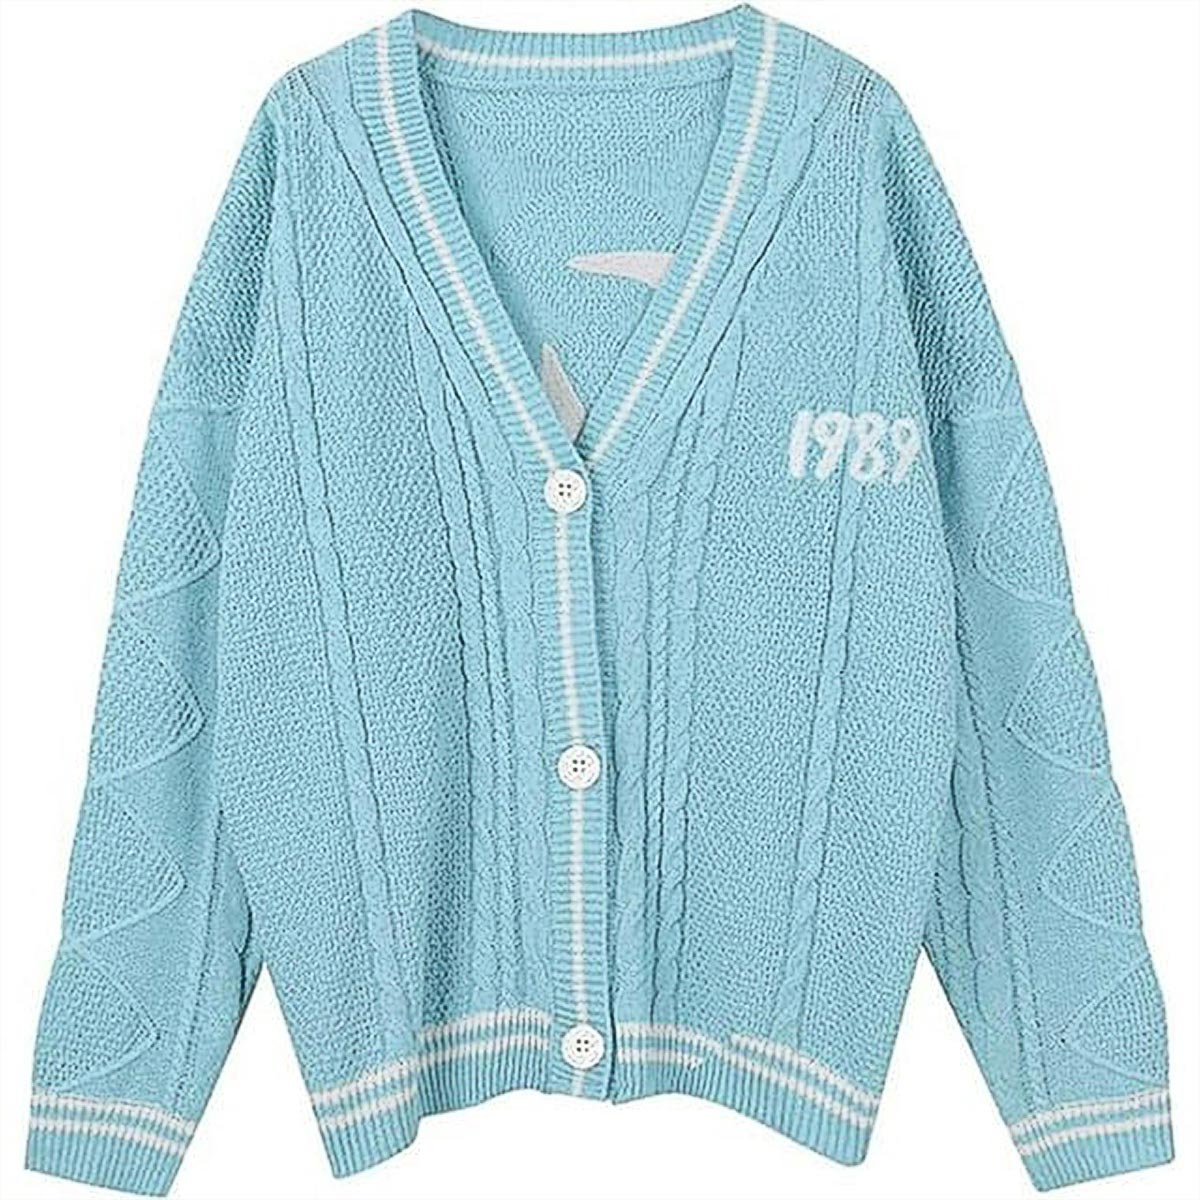 All of Taylor Swift's Album-Themed Cardigans | Us Weekly